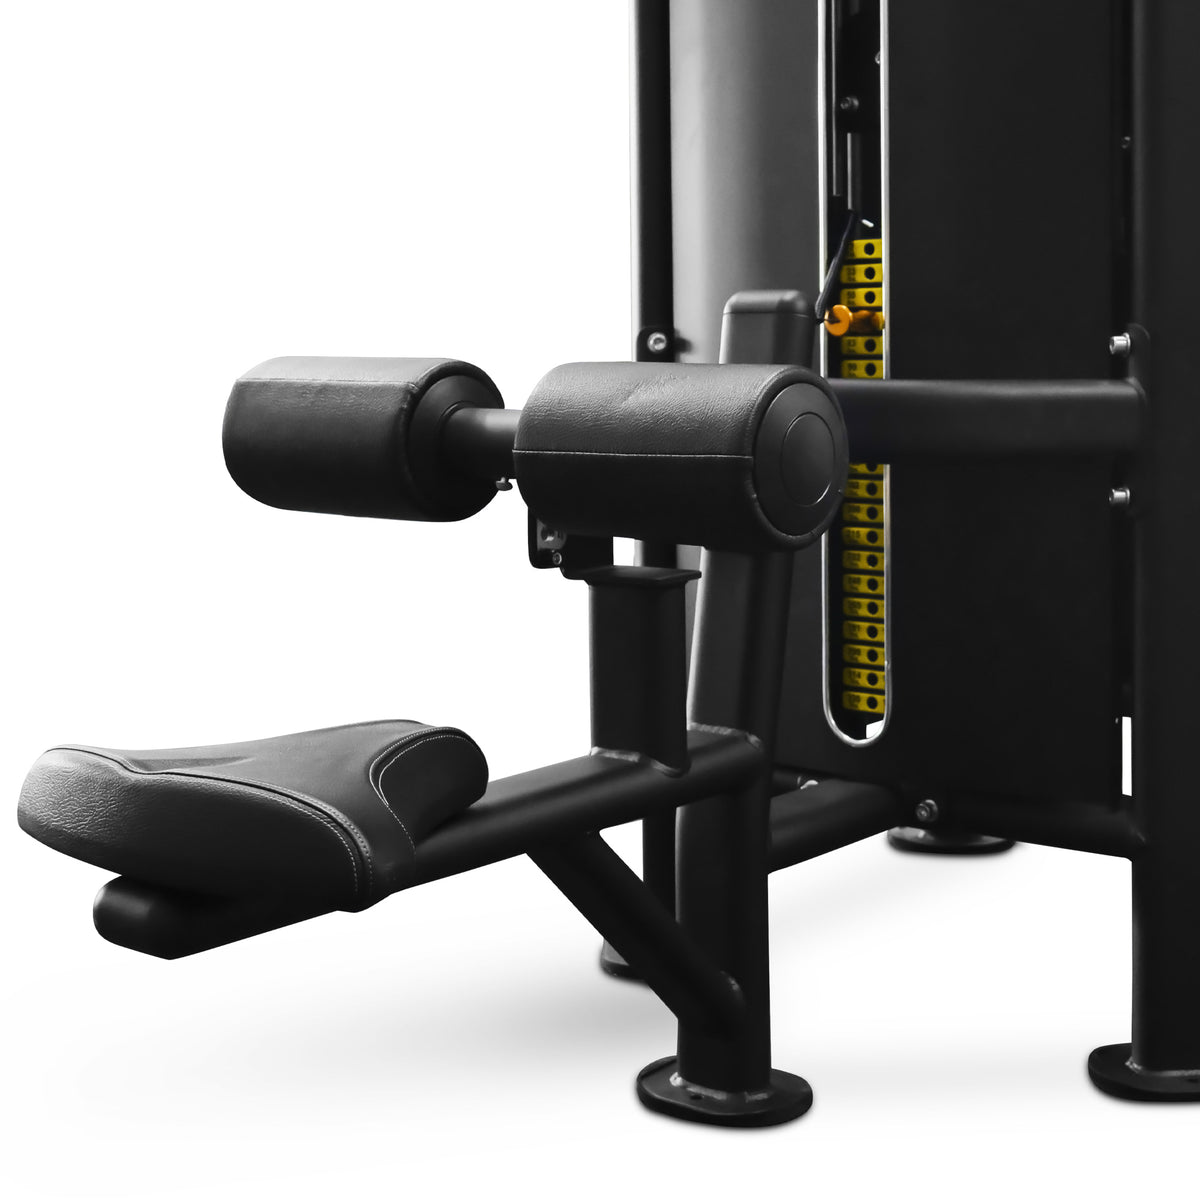 Reeplex 4 Station Commercial Multi-Gym with 150kg Weight Stacks - lat pulldown